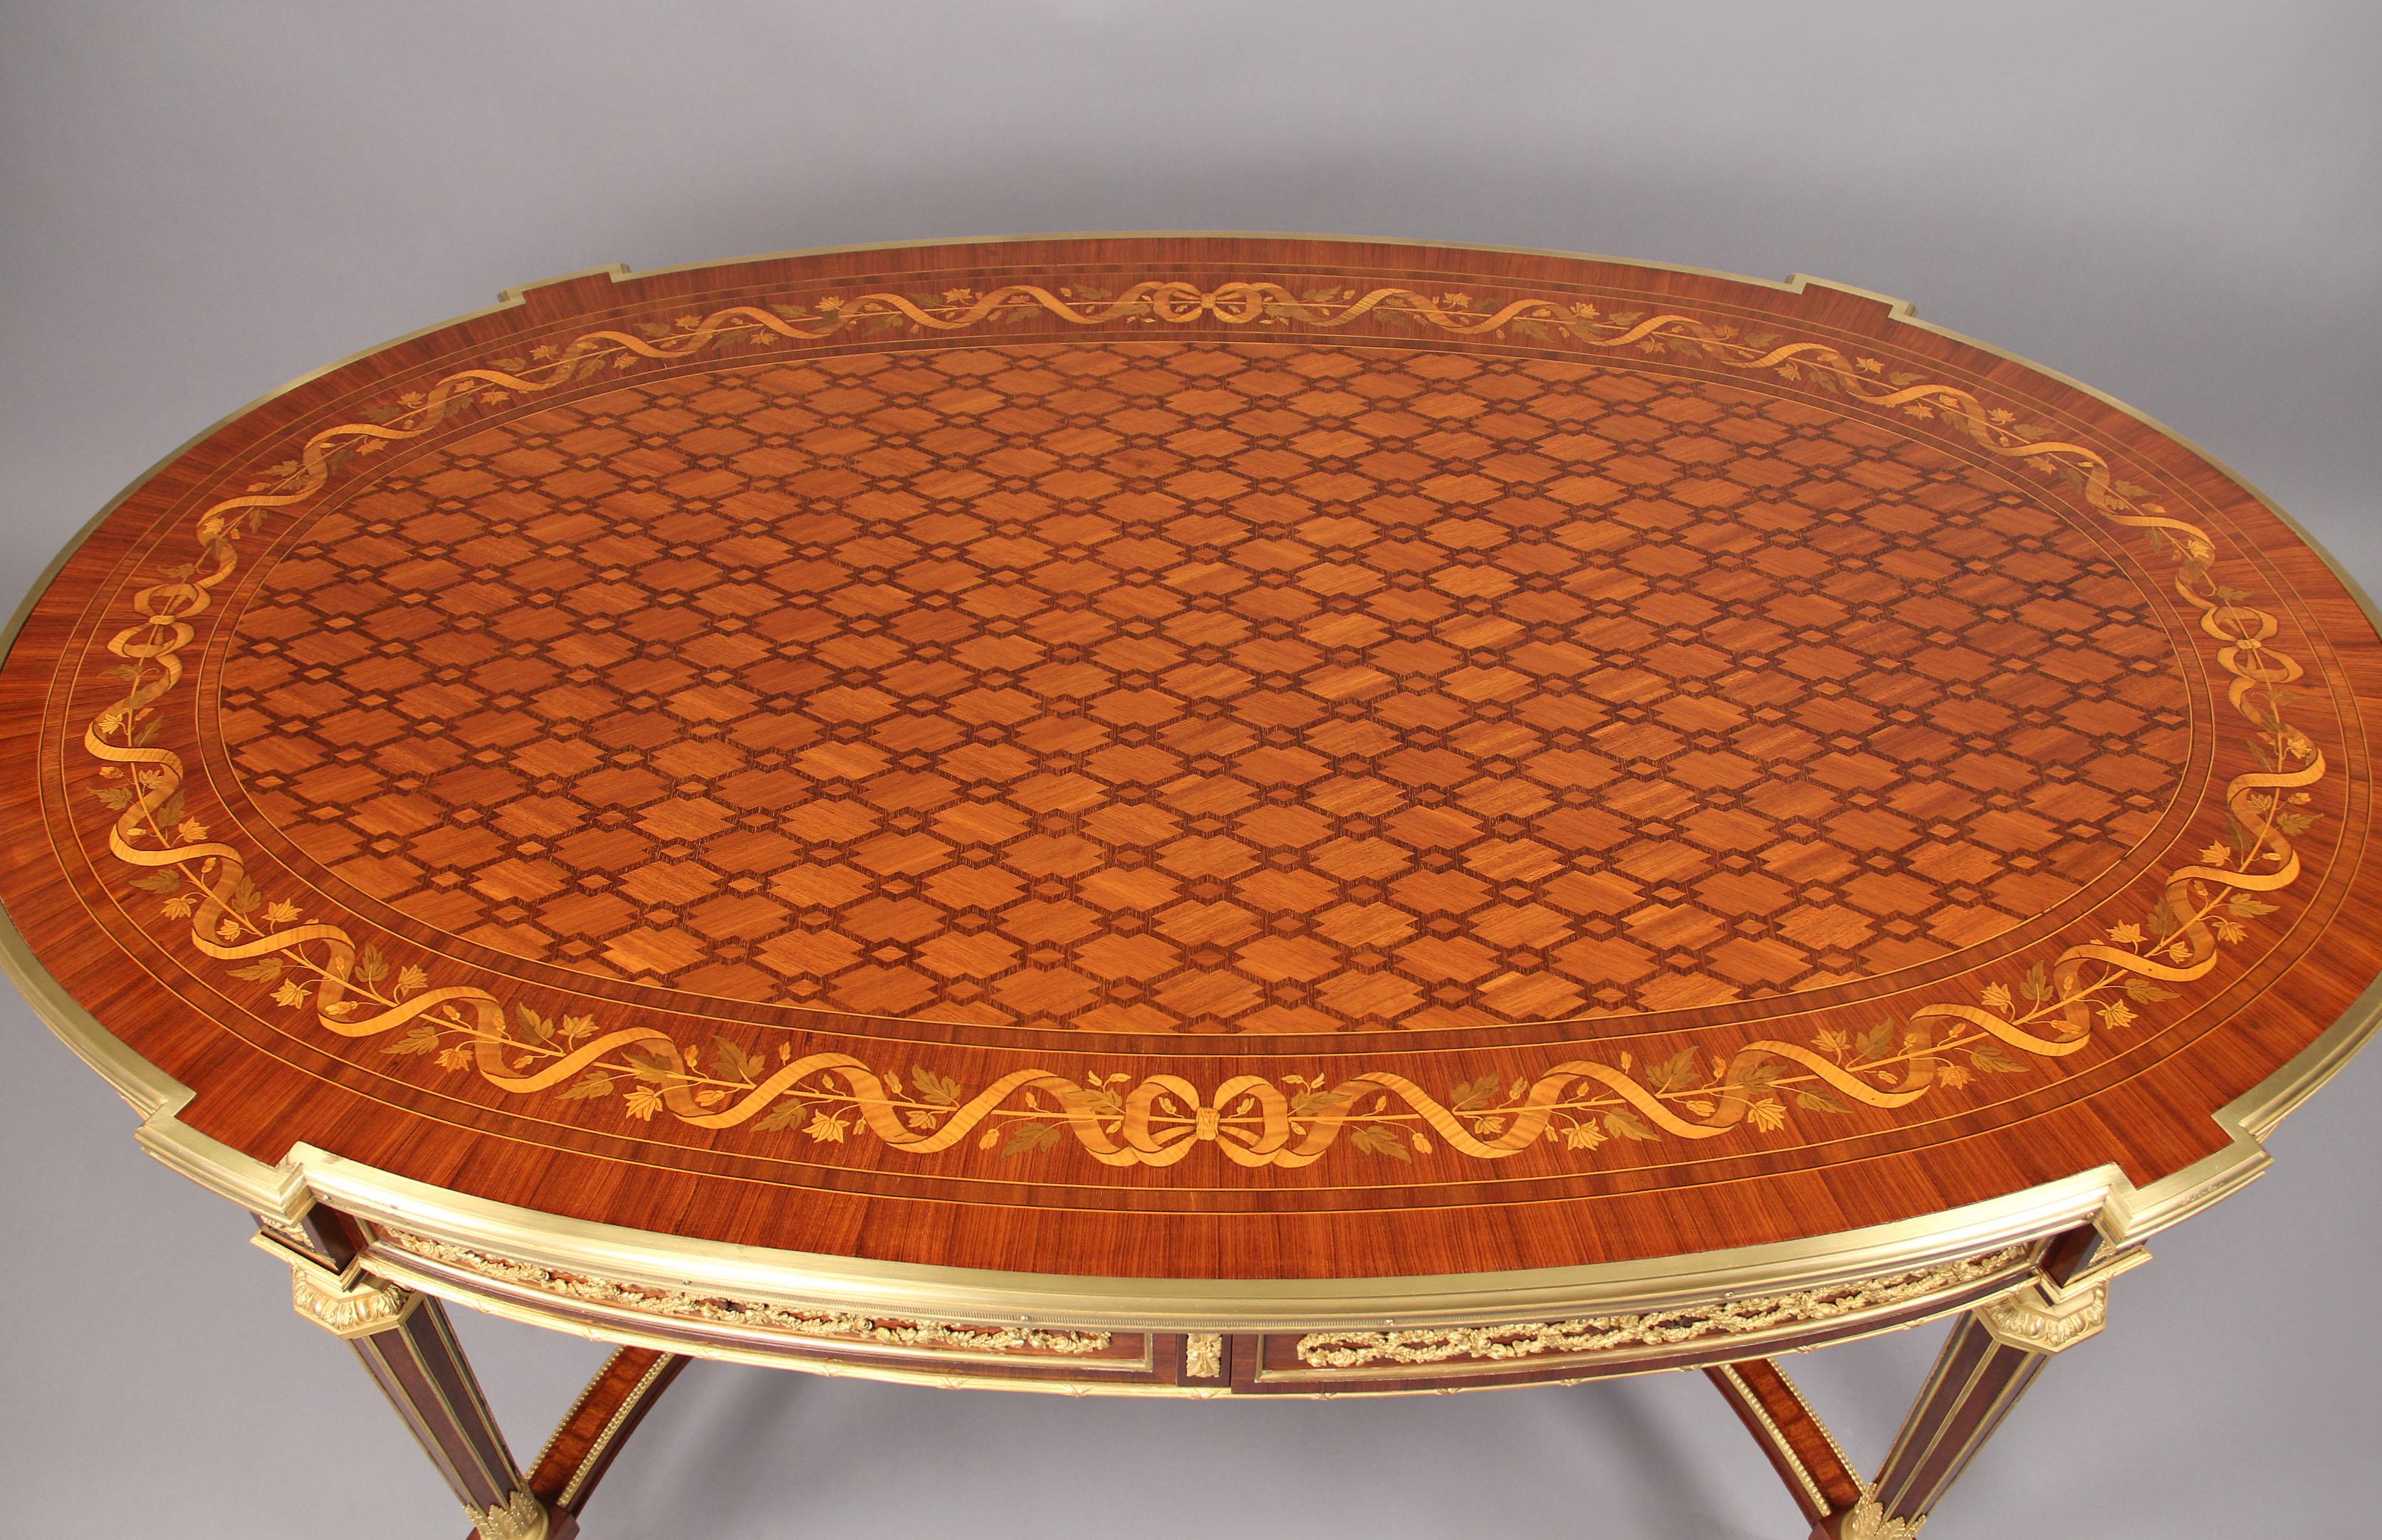 French Rare Late 19th Century Inlaid Marquetry Center Table by François Linke For Sale